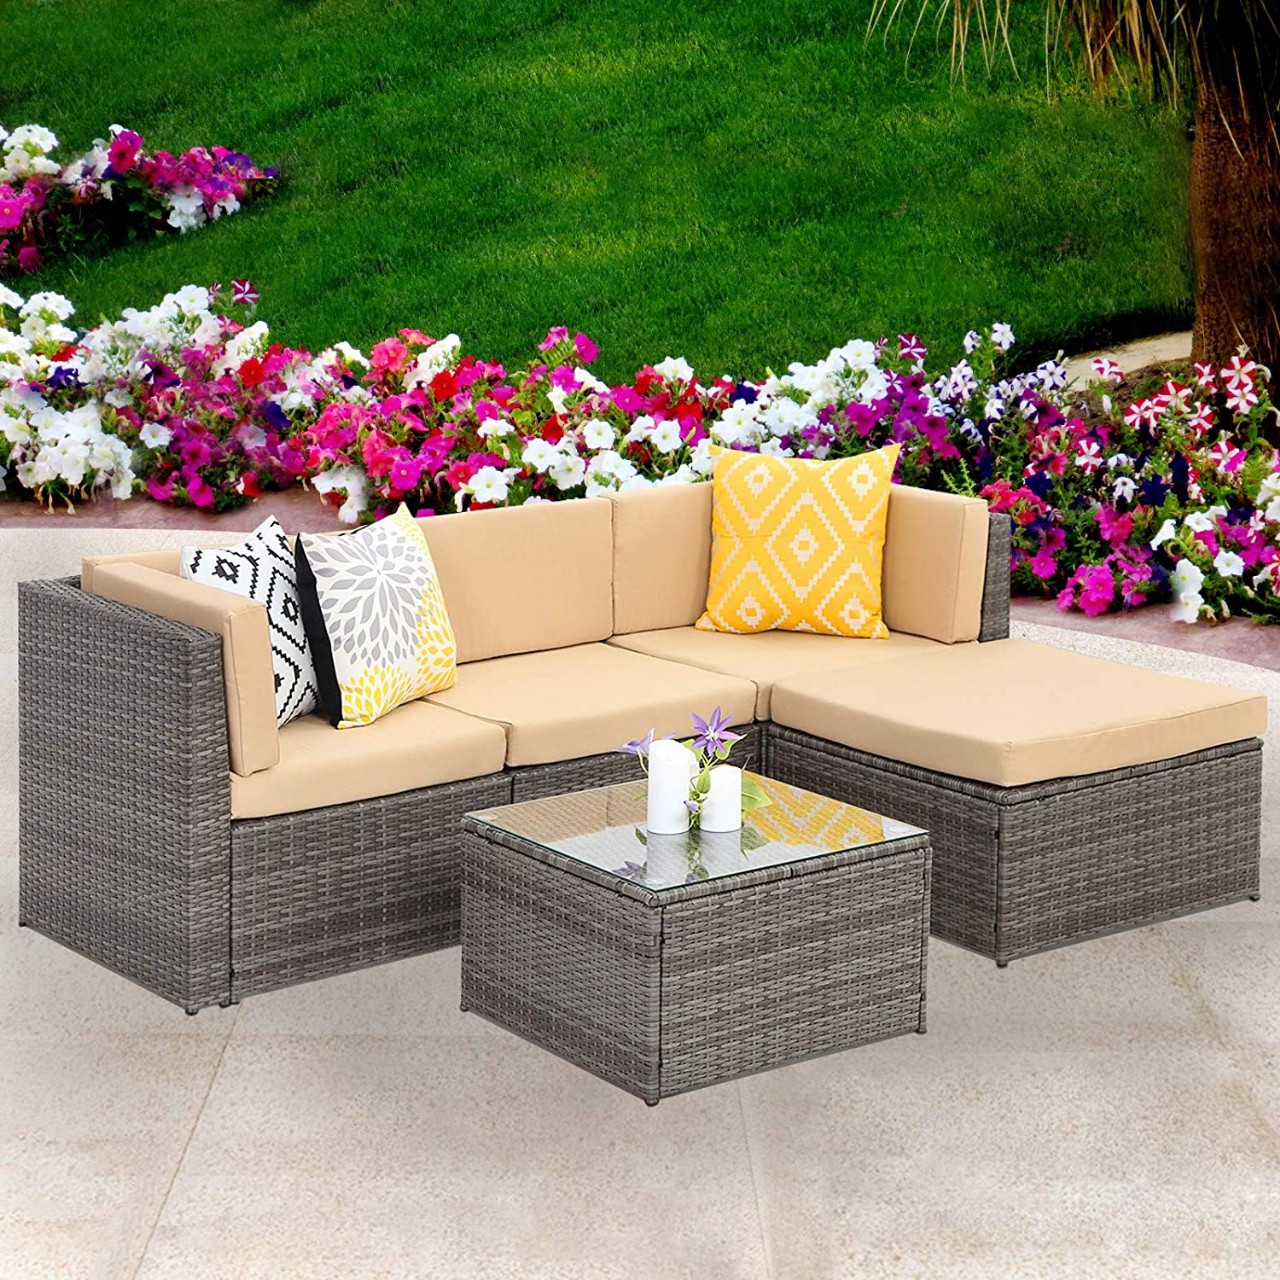 Outdoor Sectional Patio Furniture,5 Piece Wicker Rattan Sofa Couch with Ottoma Conversation Set Gray